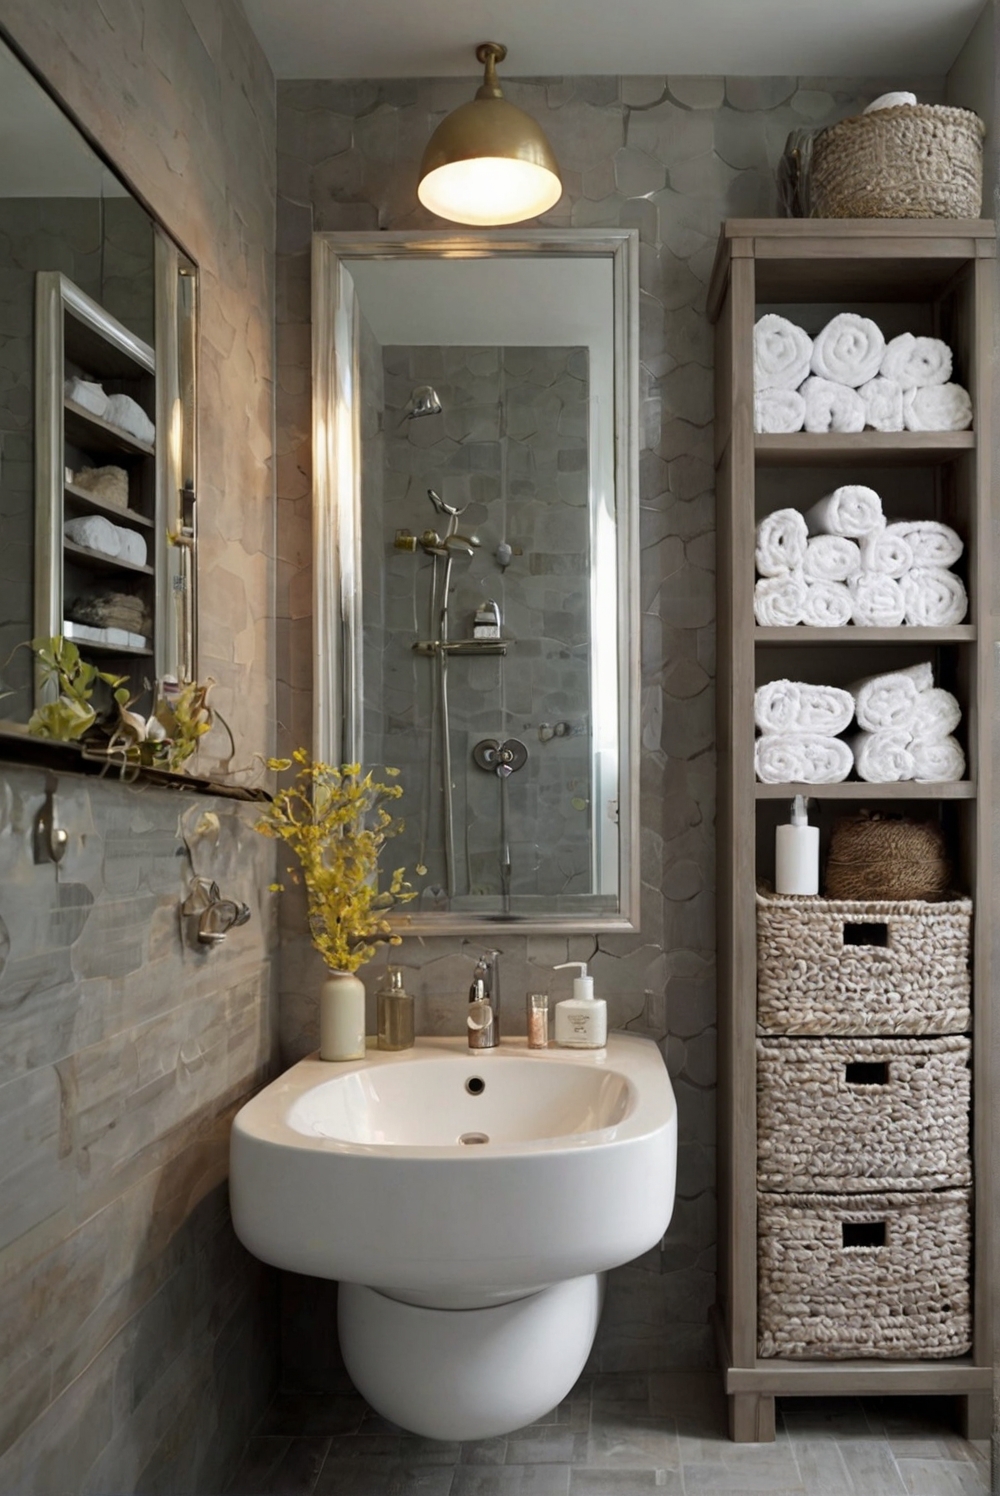 5 Clever Storage Solutions for Small Bathroom Decor